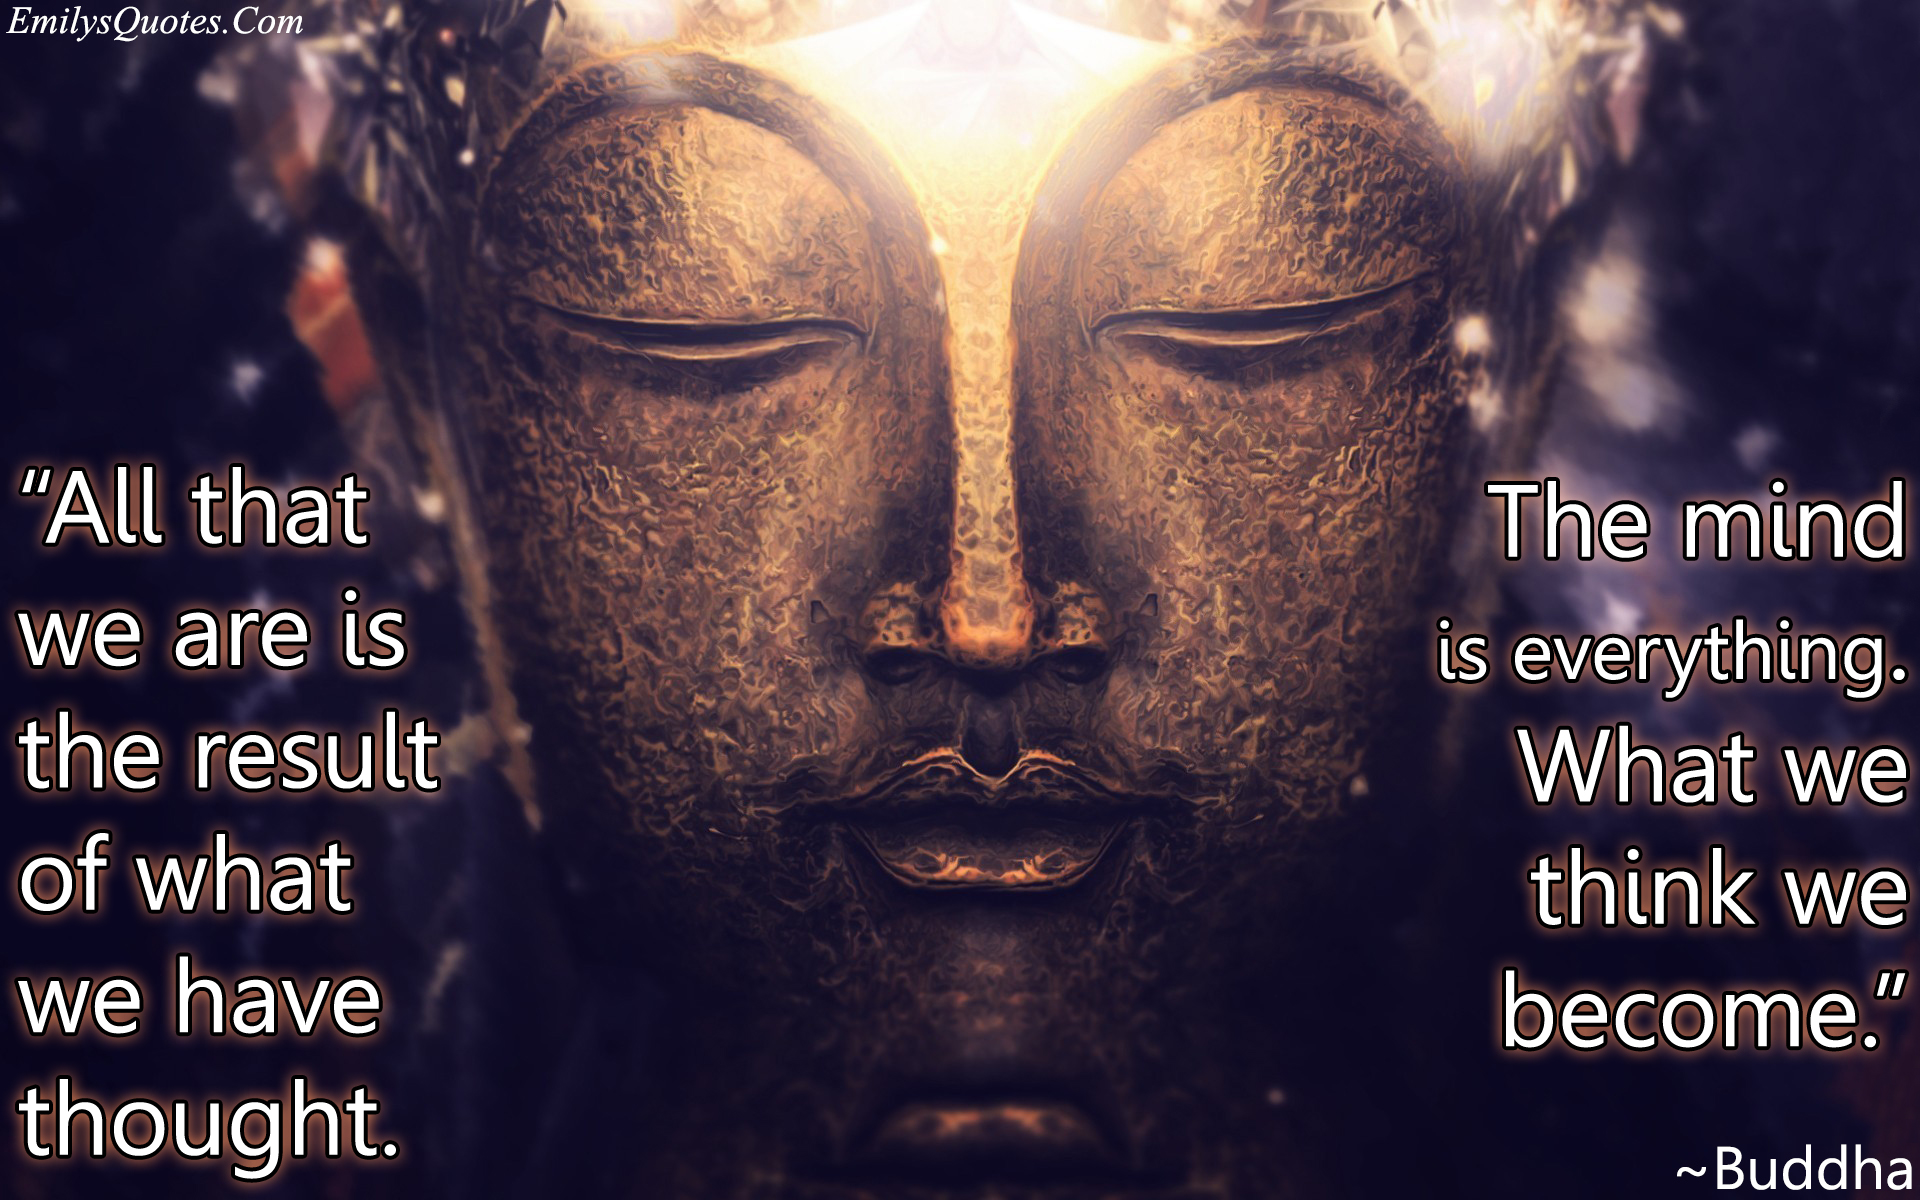 All that we are is the result of what we have thought. The mind is everything. What we think we become